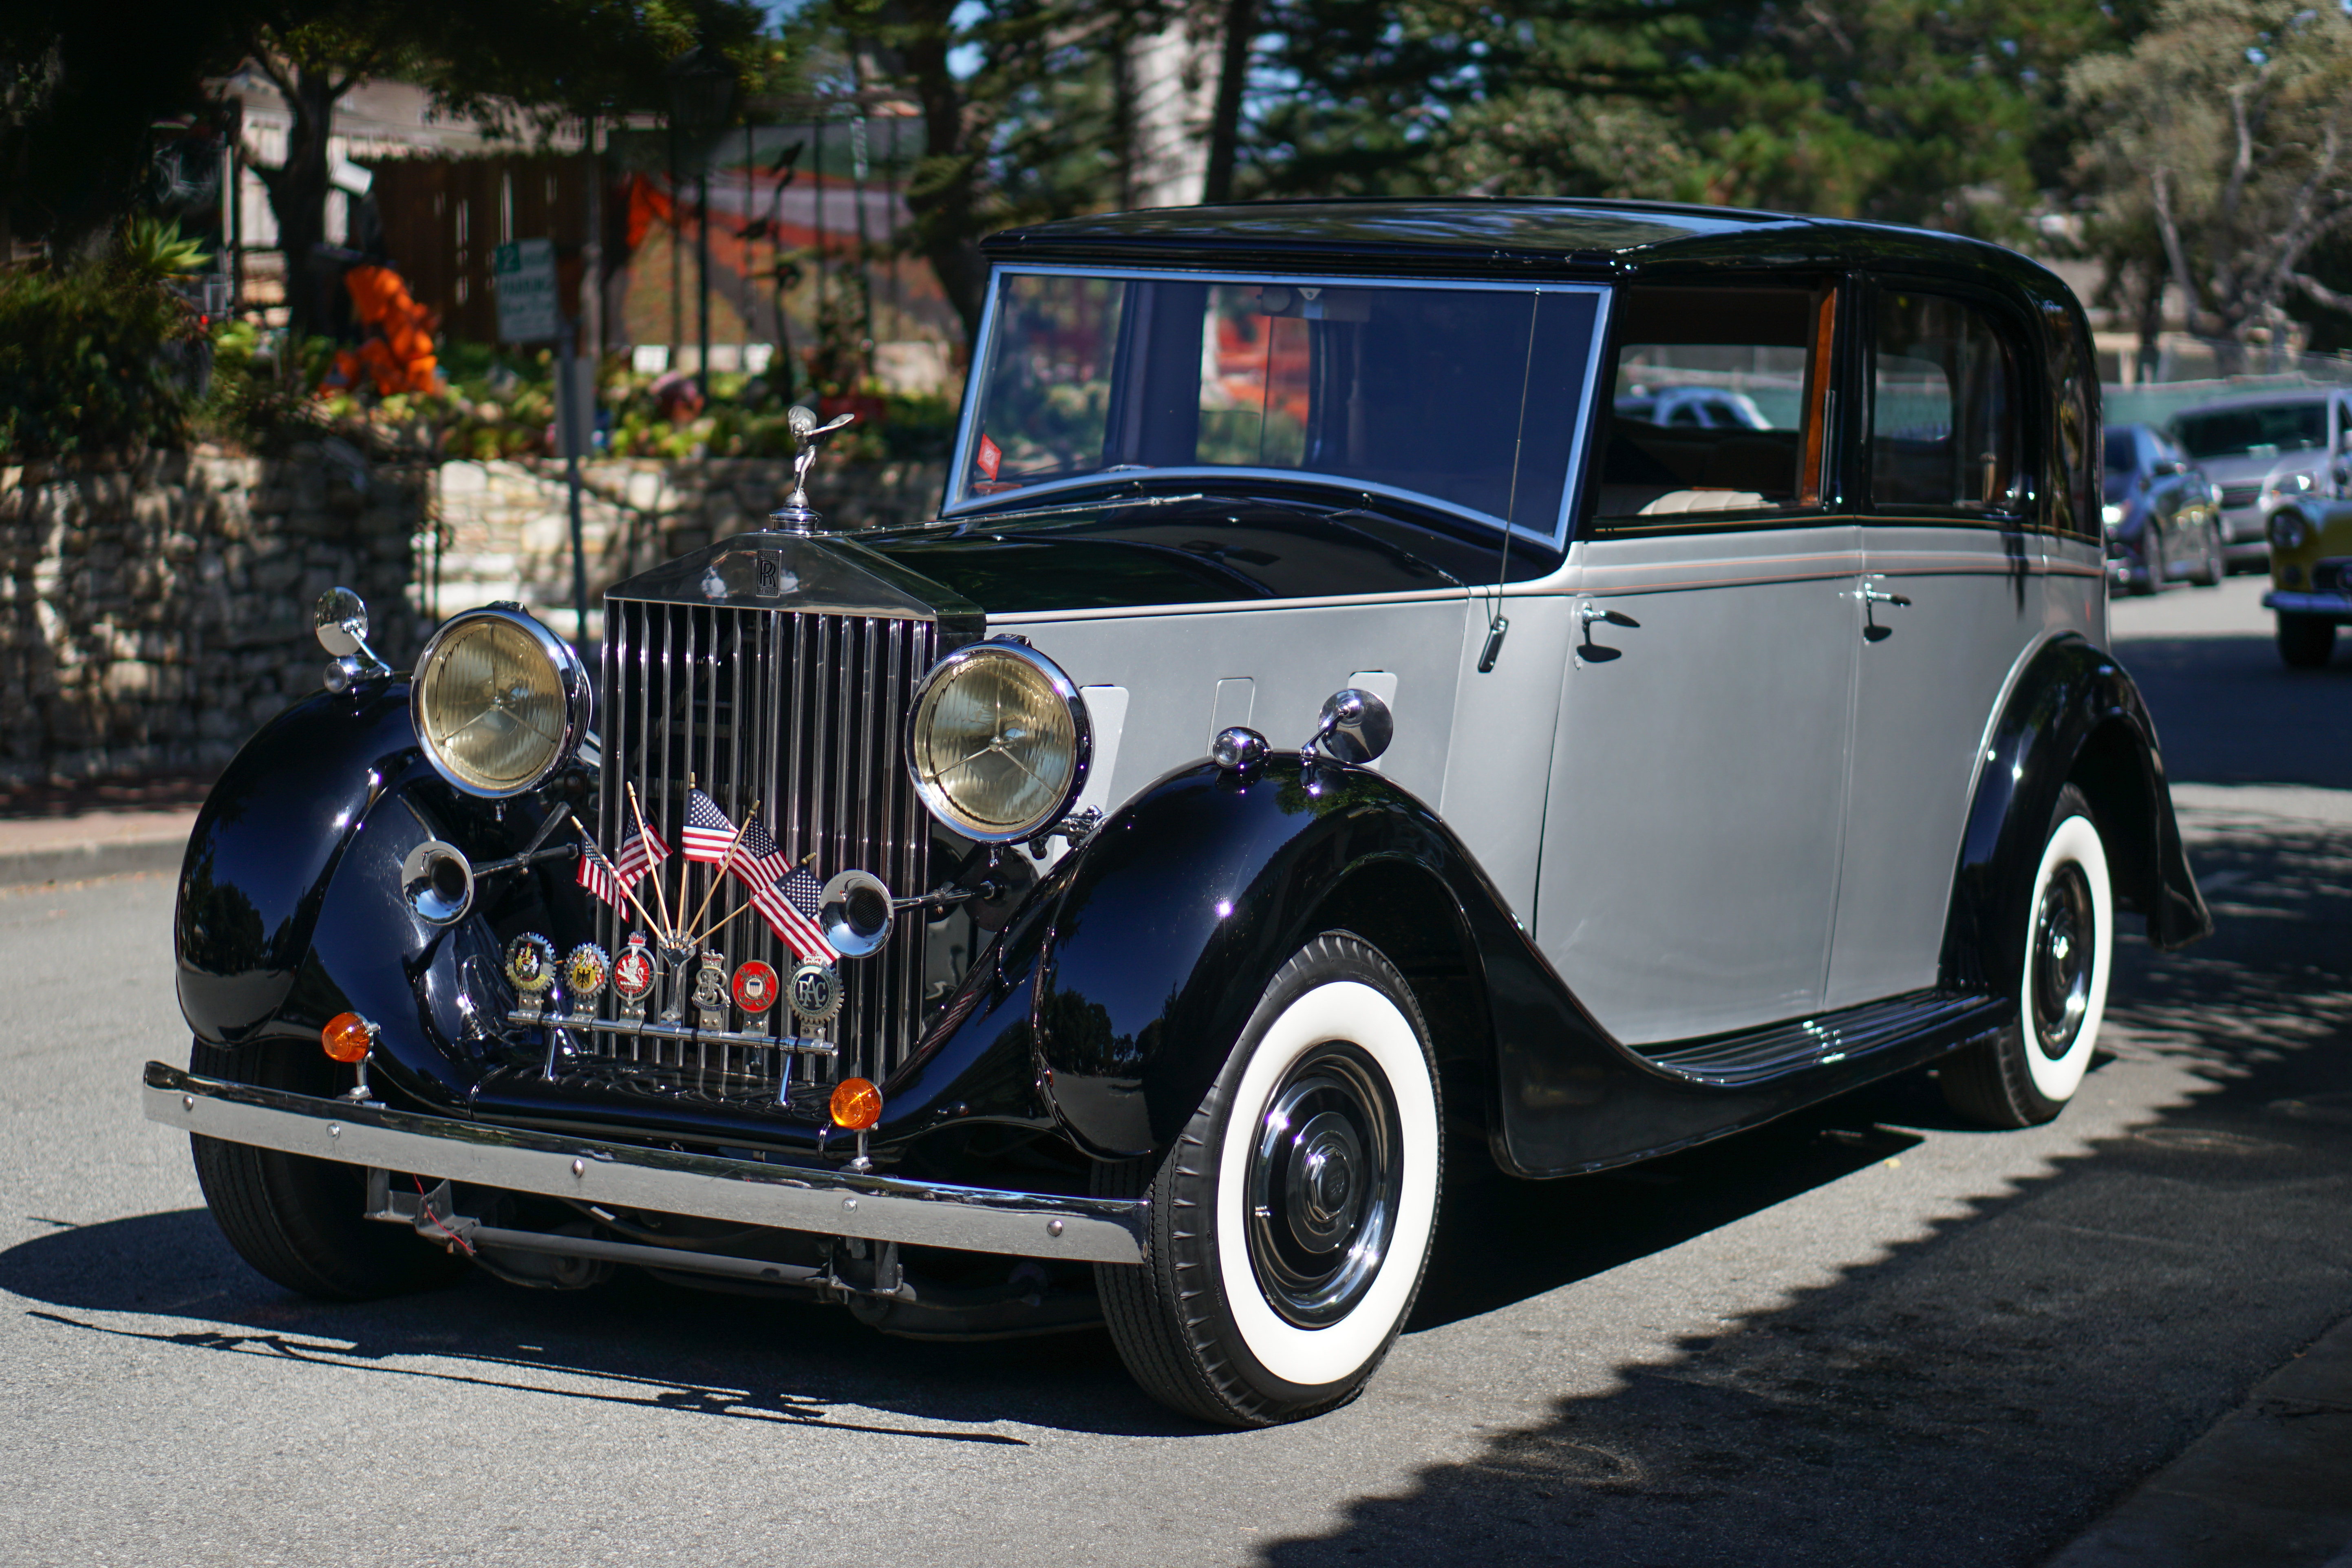 Classic Rolls-Royce on display at Prancing Ponies event | Rebecca Nguyen photos